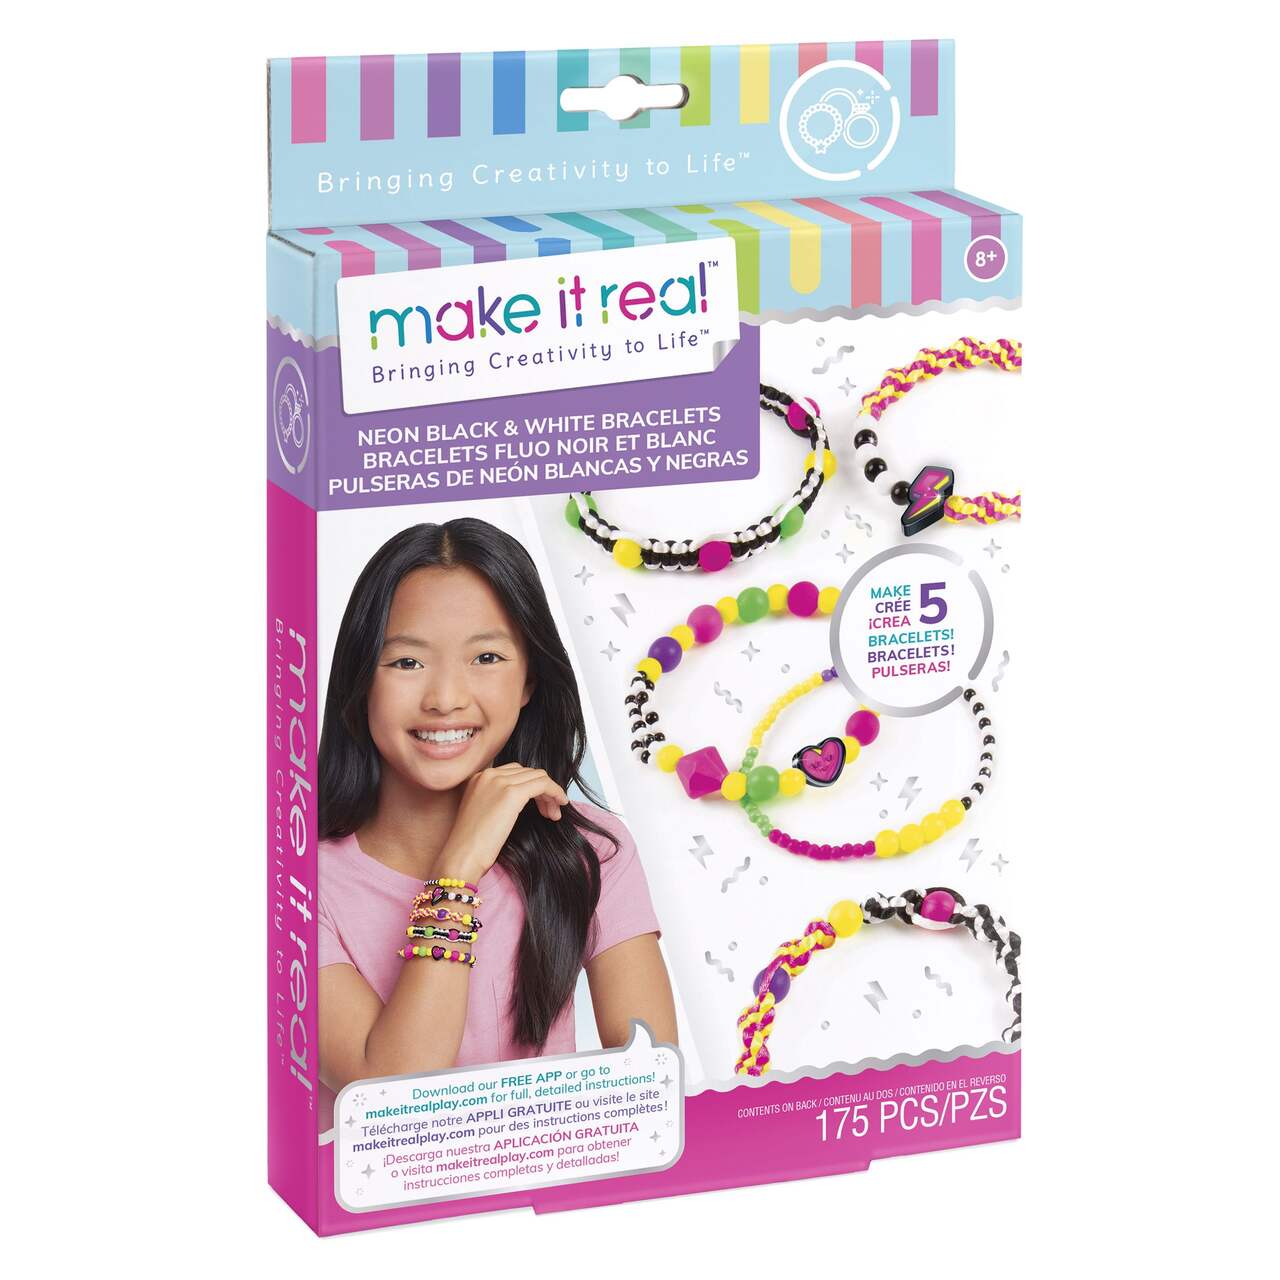 https://media-www.canadiantire.ca/product/seasonal-gardening/party-city-everyday/party-city-fun/8442461/make-it-real-retro-neon-black-white-bracelets-0c20d848-a22e-4eb2-91af-7cde86363a89-jpgrendition.jpg?imdensity=1&imwidth=640&impolicy=mZoom